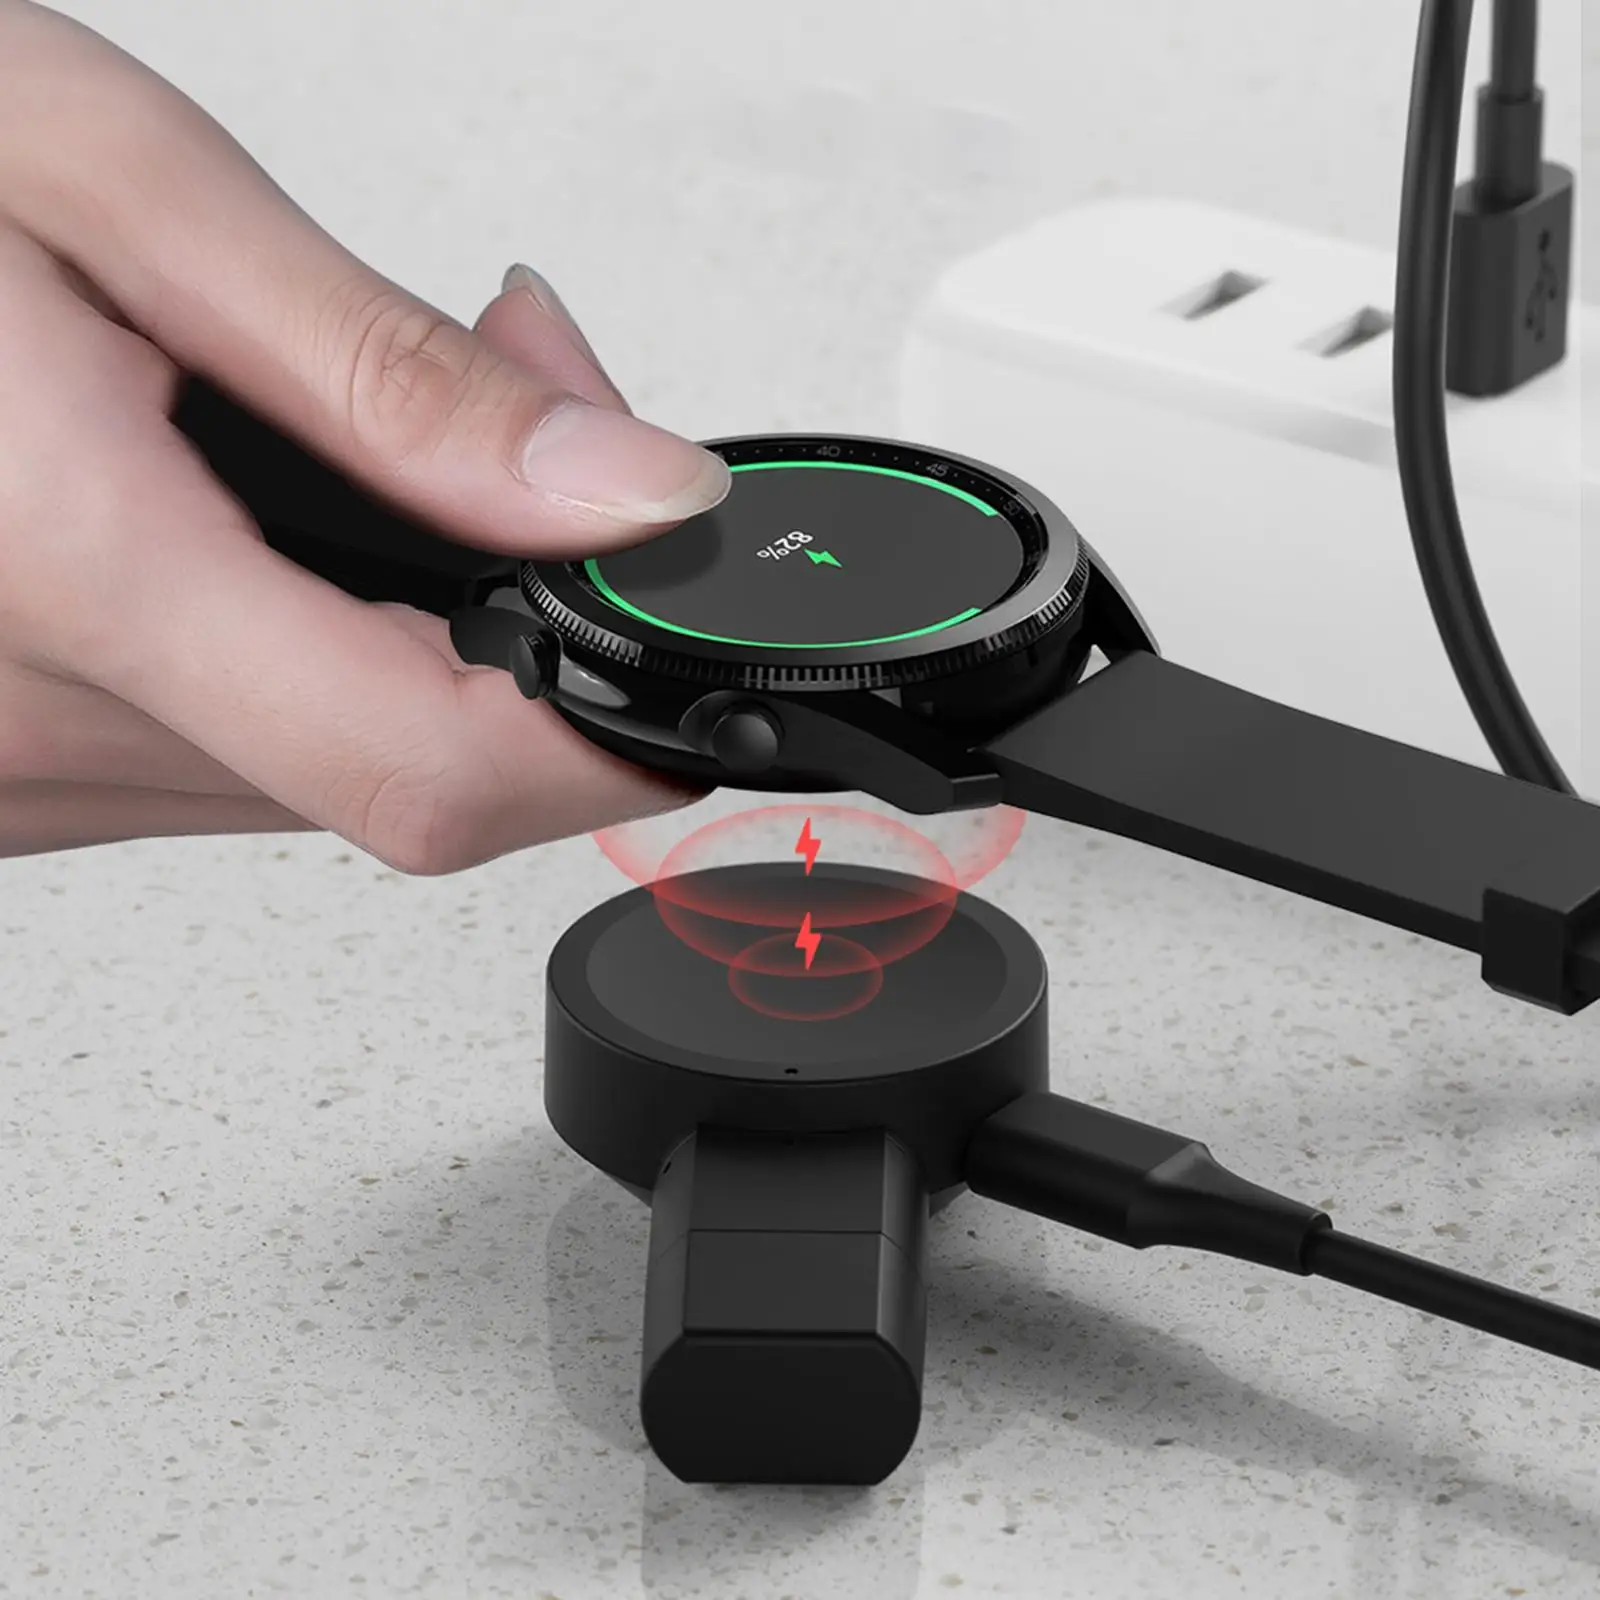 Portable charger for watch with USB, Type C Charging Port Easily Carry